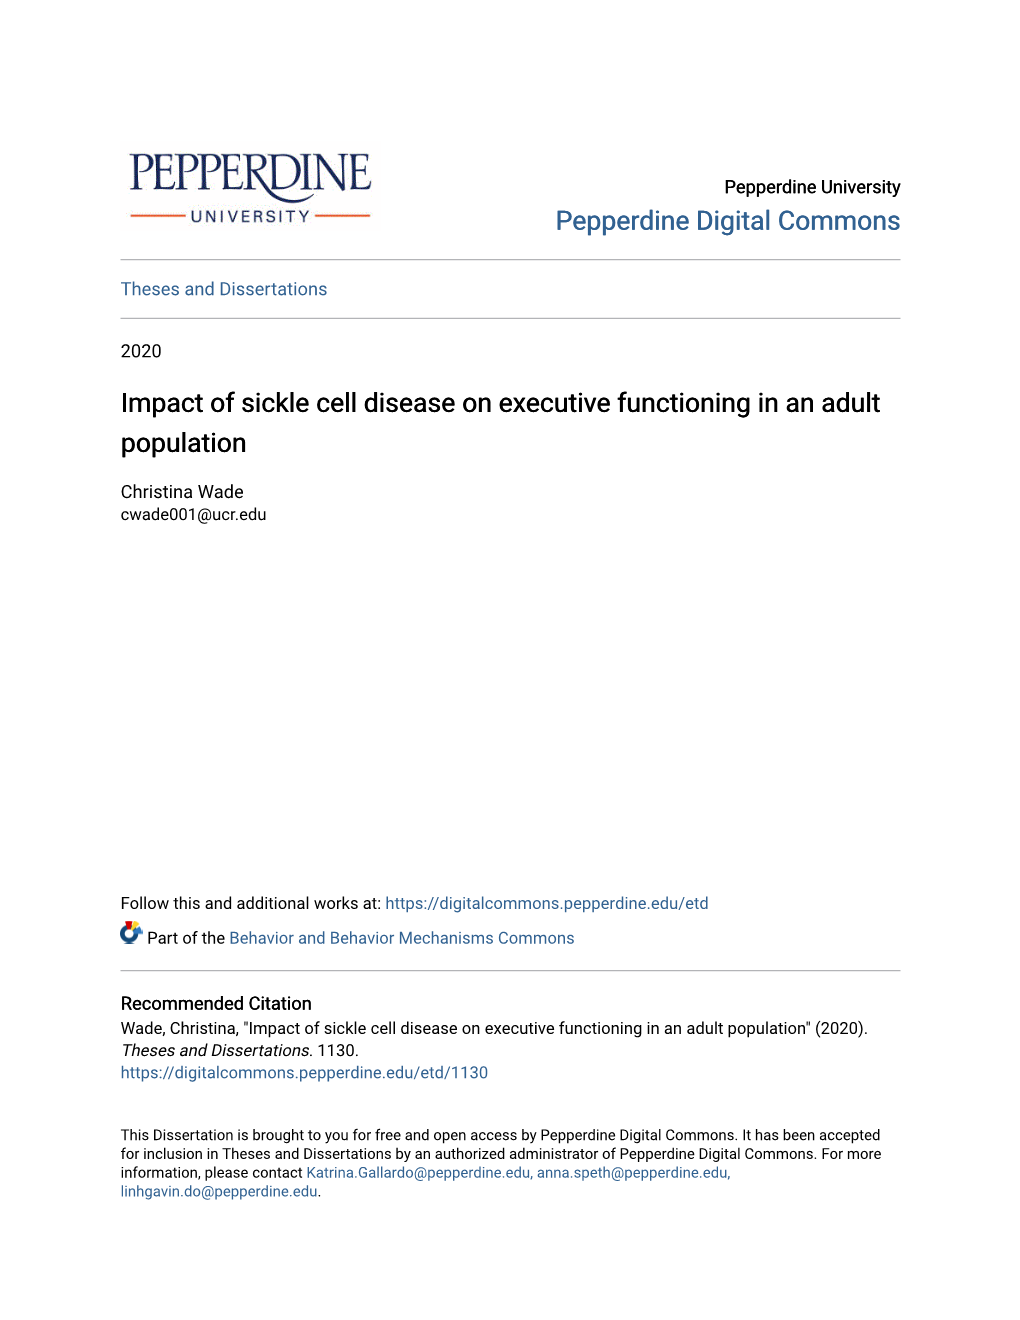 Impact of Sickle Cell Disease on Executive Functioning in an Adult Population